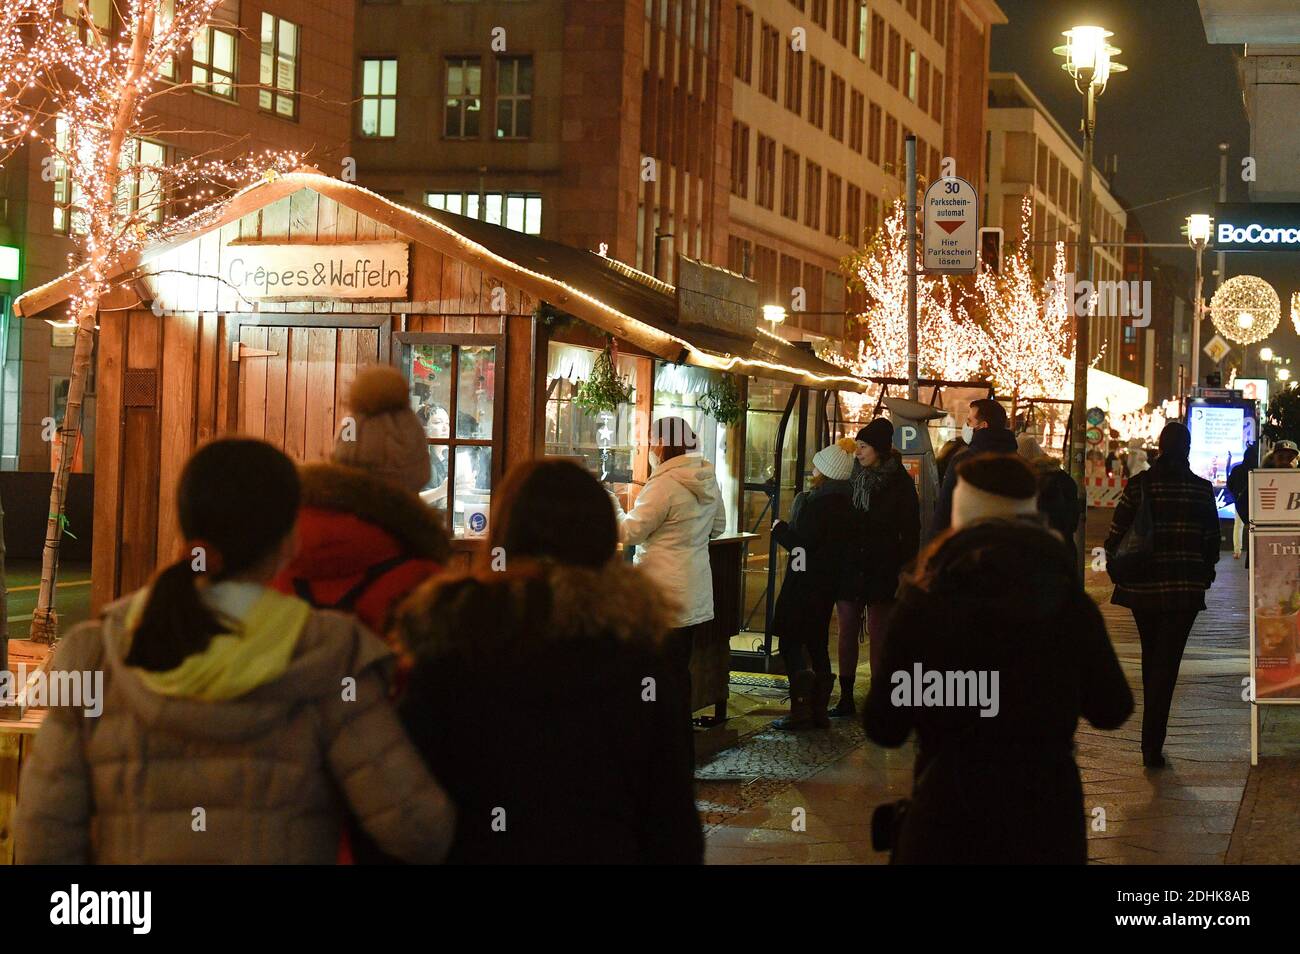 As an alternative to the canceled Weihaftertsmarkets, there are individual stands this year with Weihaftertsschmuck and offers such as mulled wine, almonds and bratwurst, here in the car-free part of Friedrichstrasse. Berlin, December 10th, 2020 | usage worldwide Stock Photo